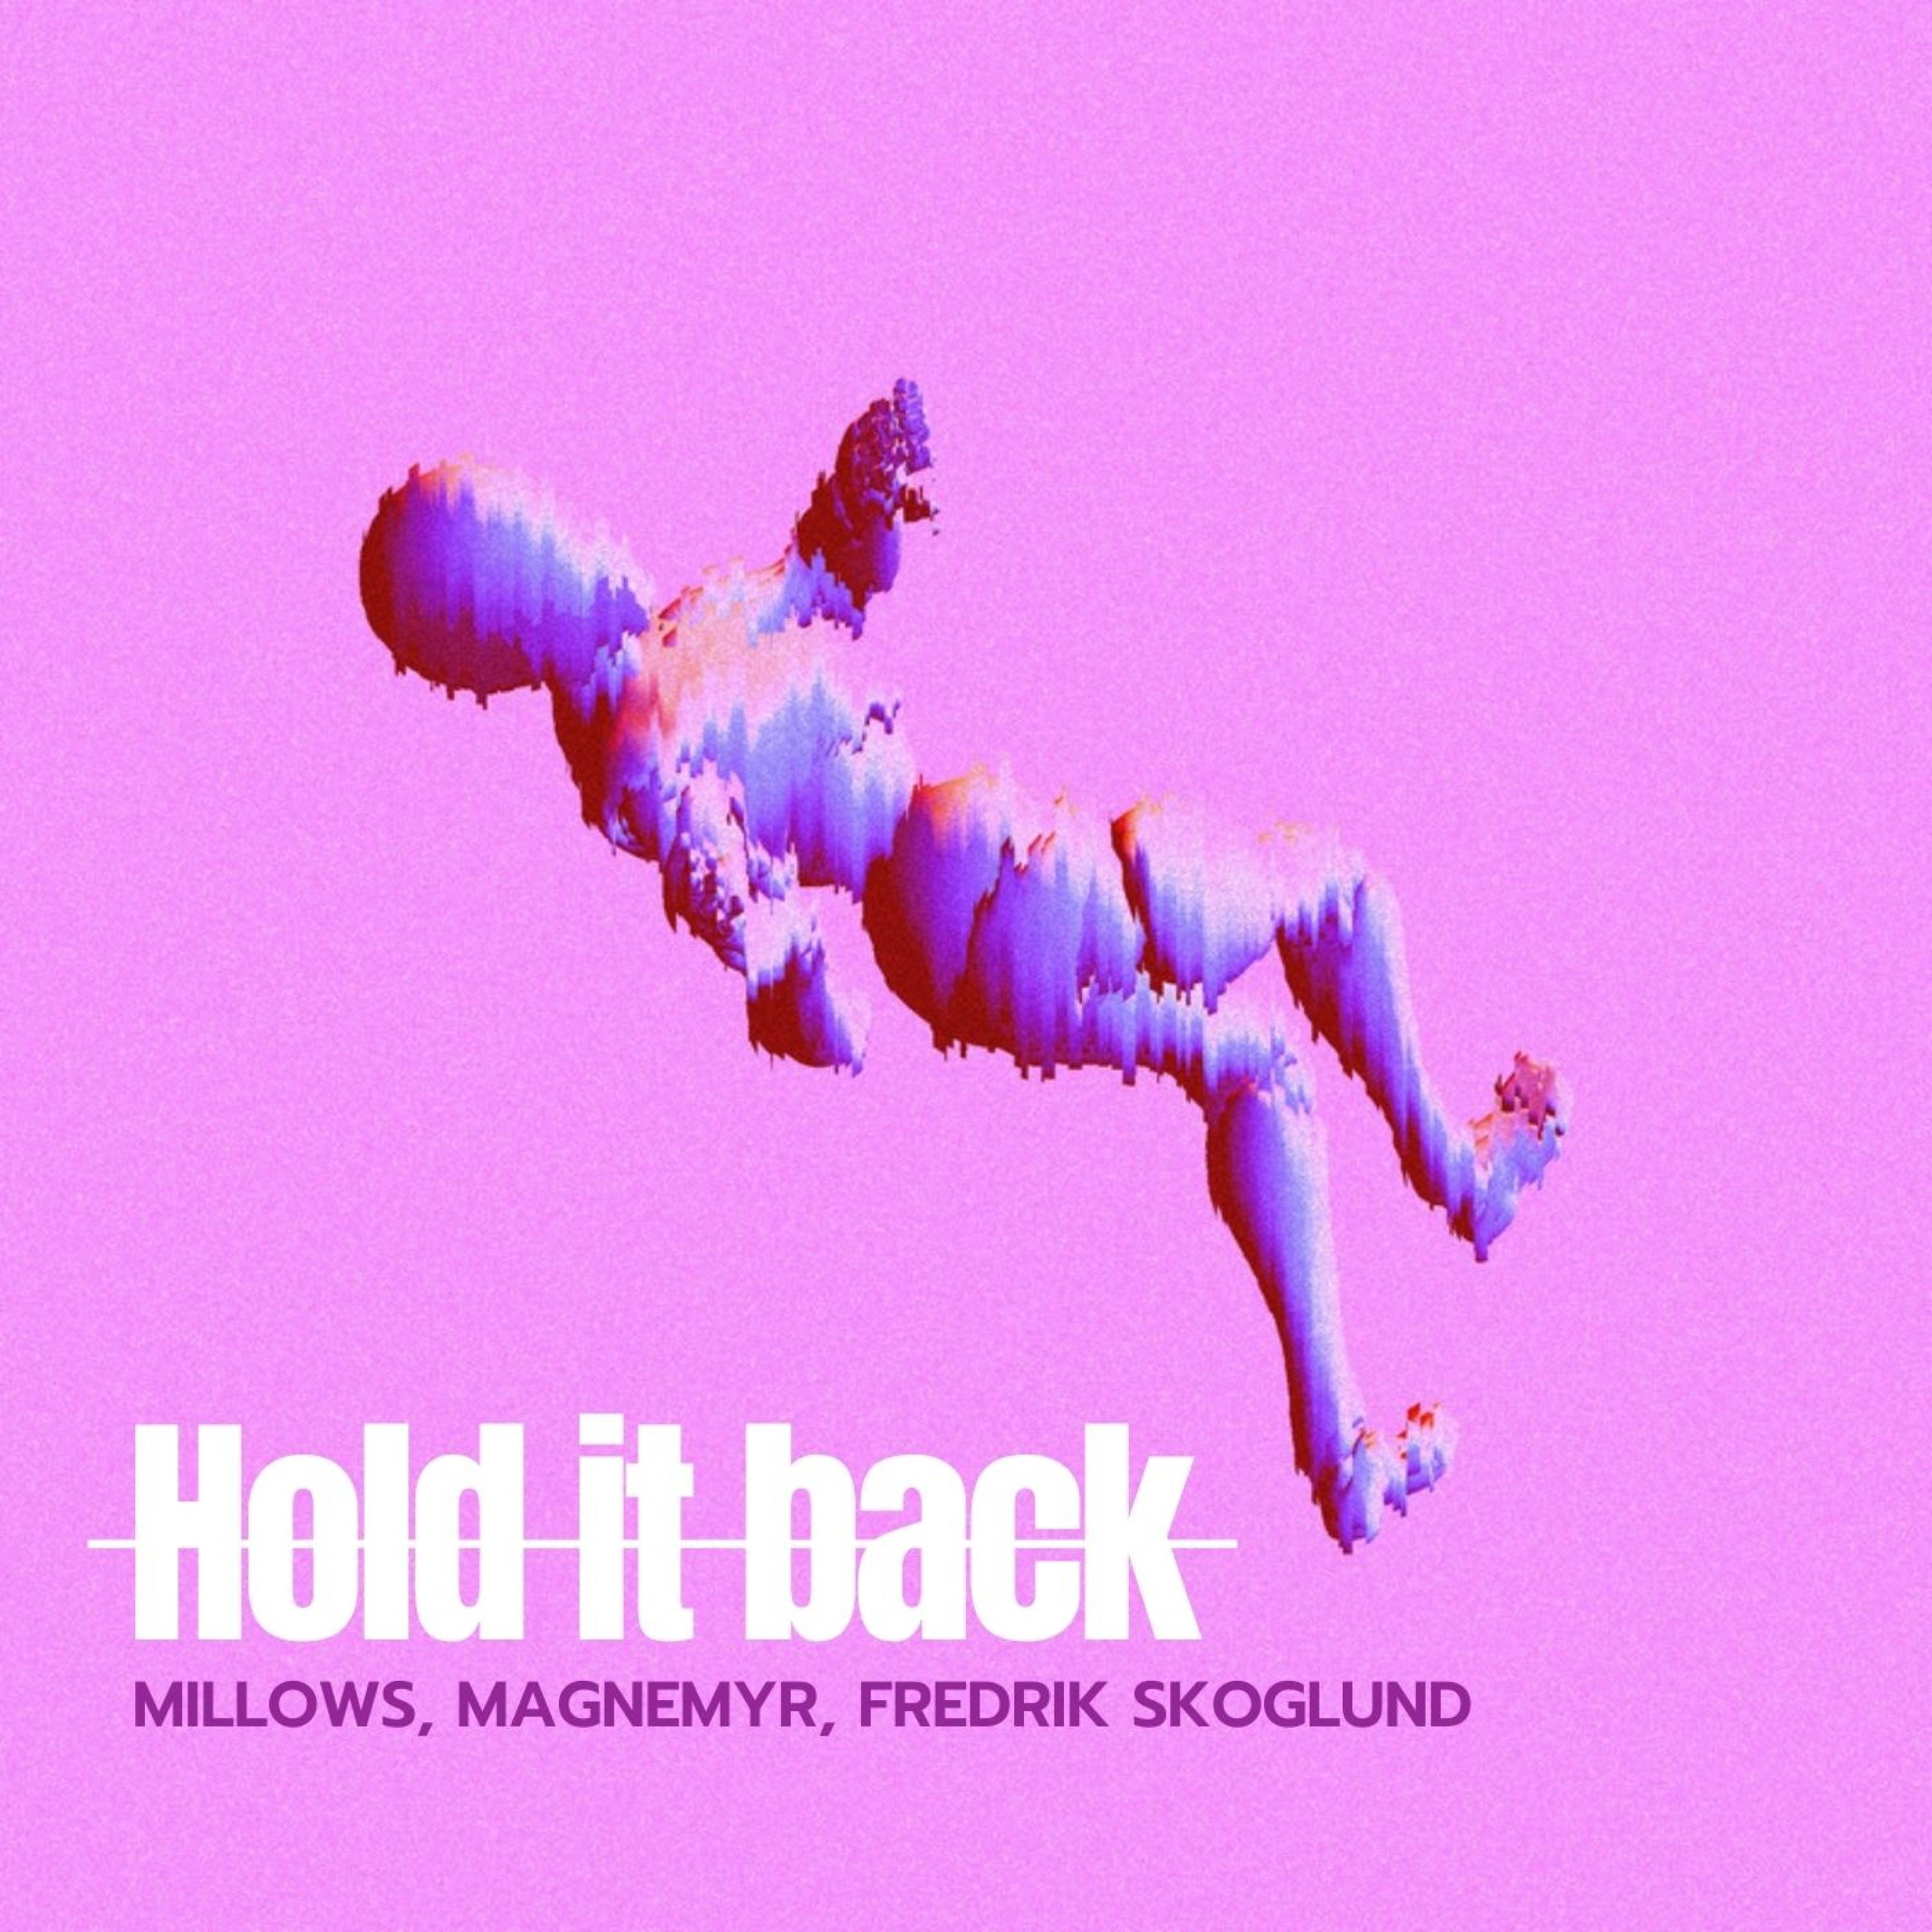 Millows - Hold it back